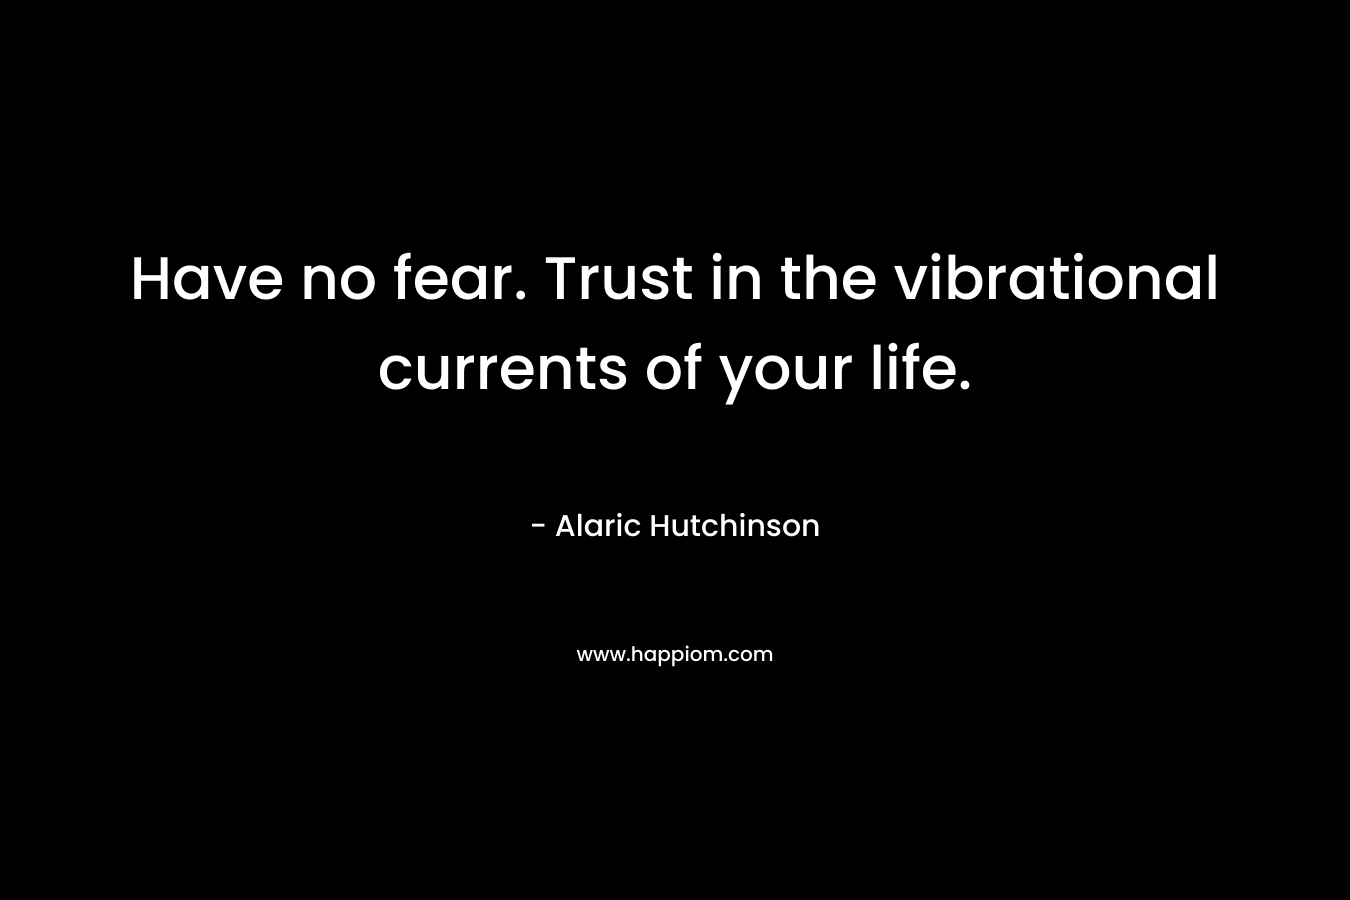 Have no fear. Trust in the vibrational currents of your life. – Alaric Hutchinson